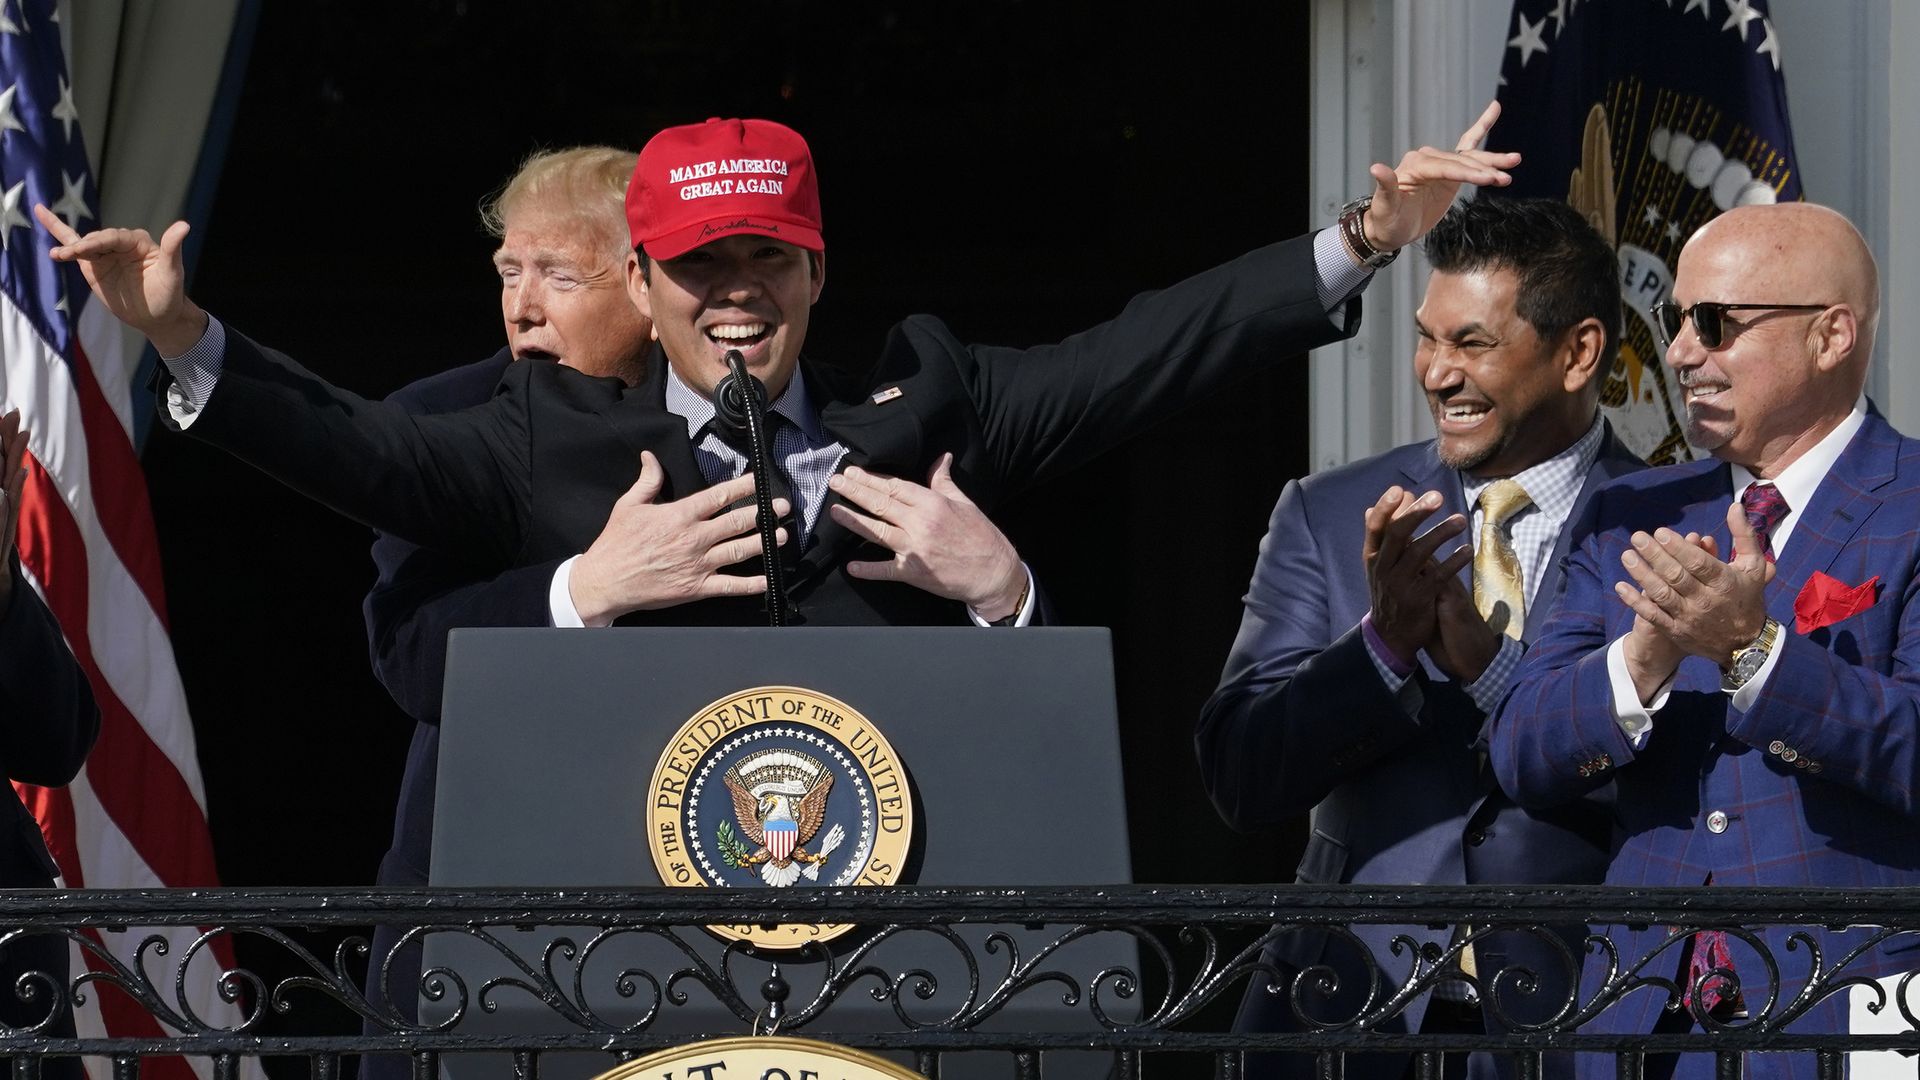 Trump holds Washington Nationals player Suzuki at the White House as two Nats players laugh next to them.